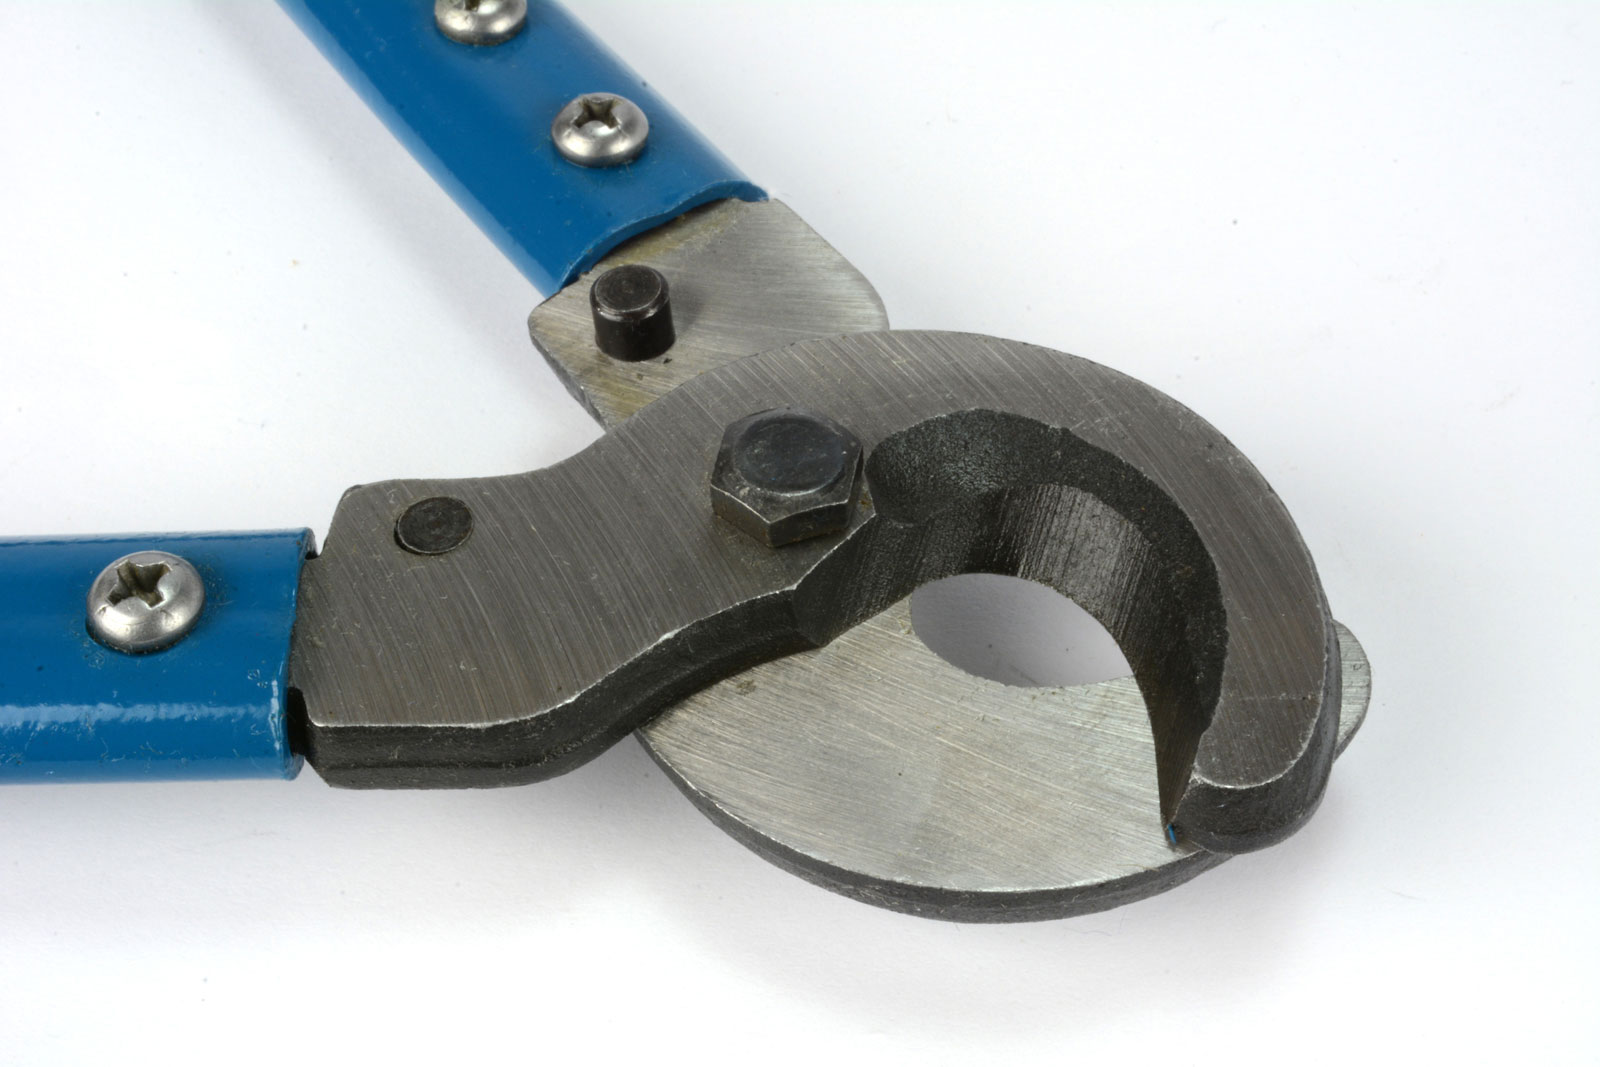 Heavy Duty Cable Wire Cutter Electrical Tool Up to 0 Gauge Copper or  Aluminum